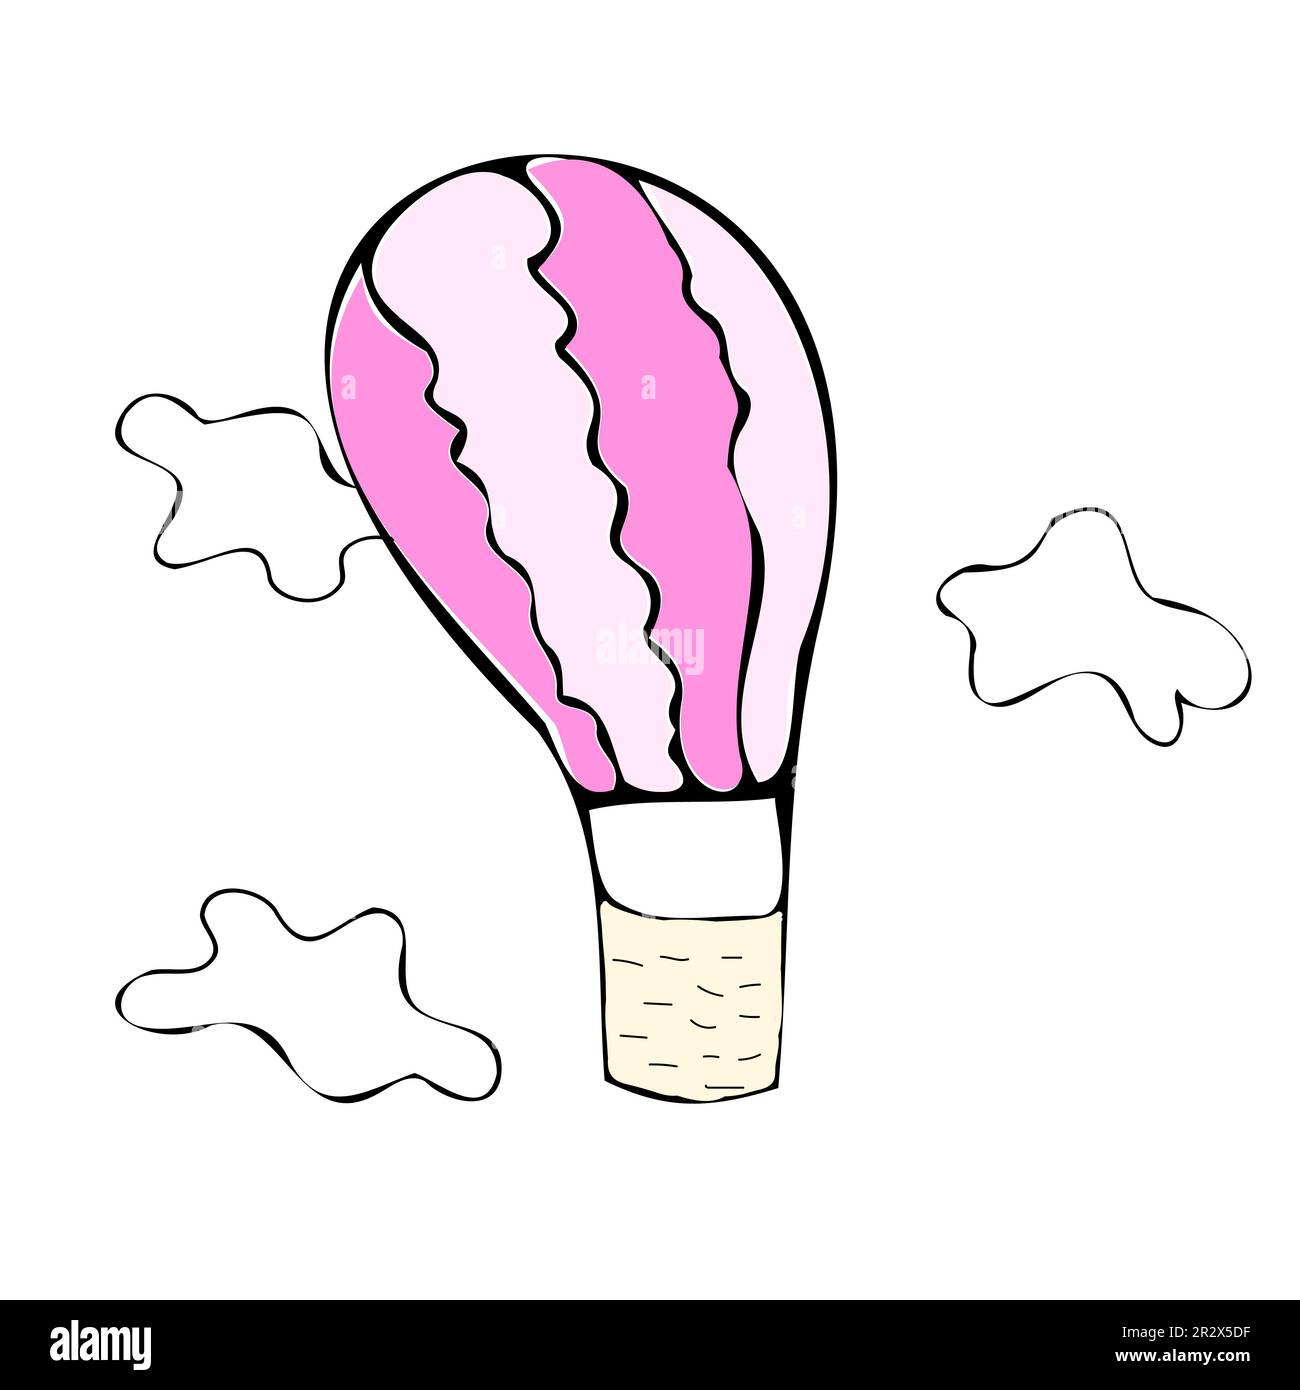 air baloon in a pink color with clouds doodle Stock Vector